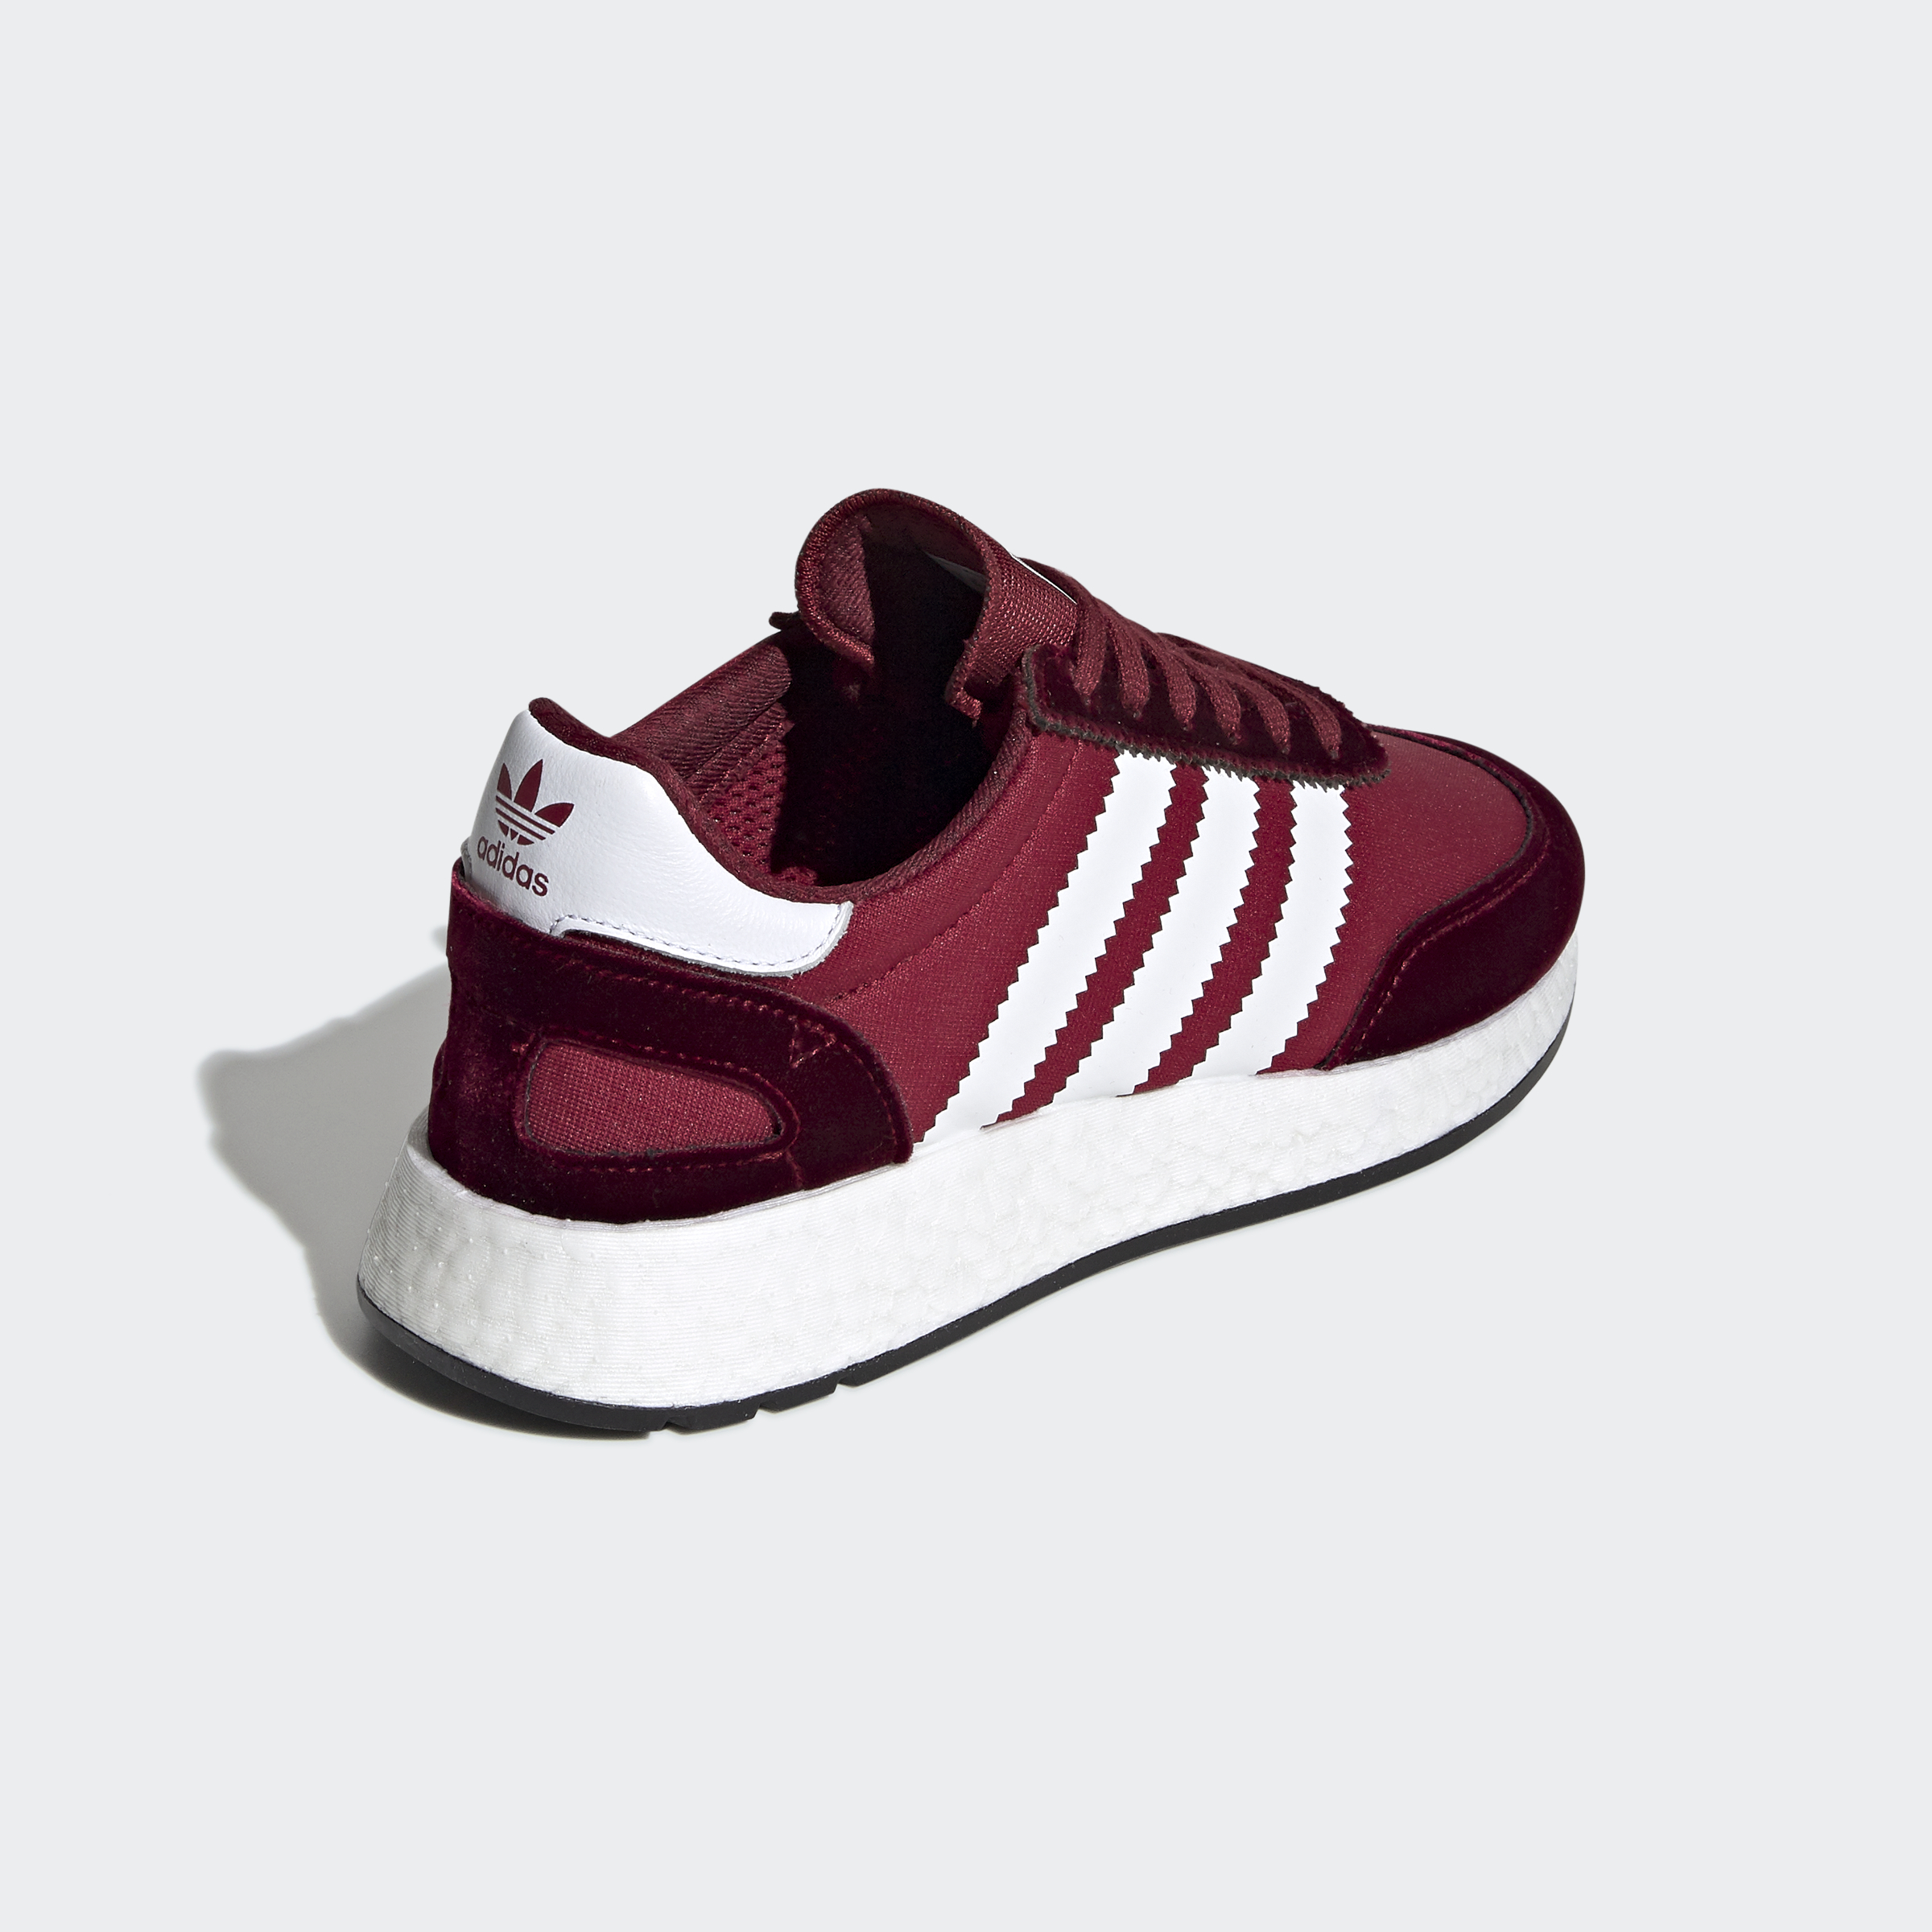 adidas I-5923 Shoes Women's Athletic & Sneakers | eBay